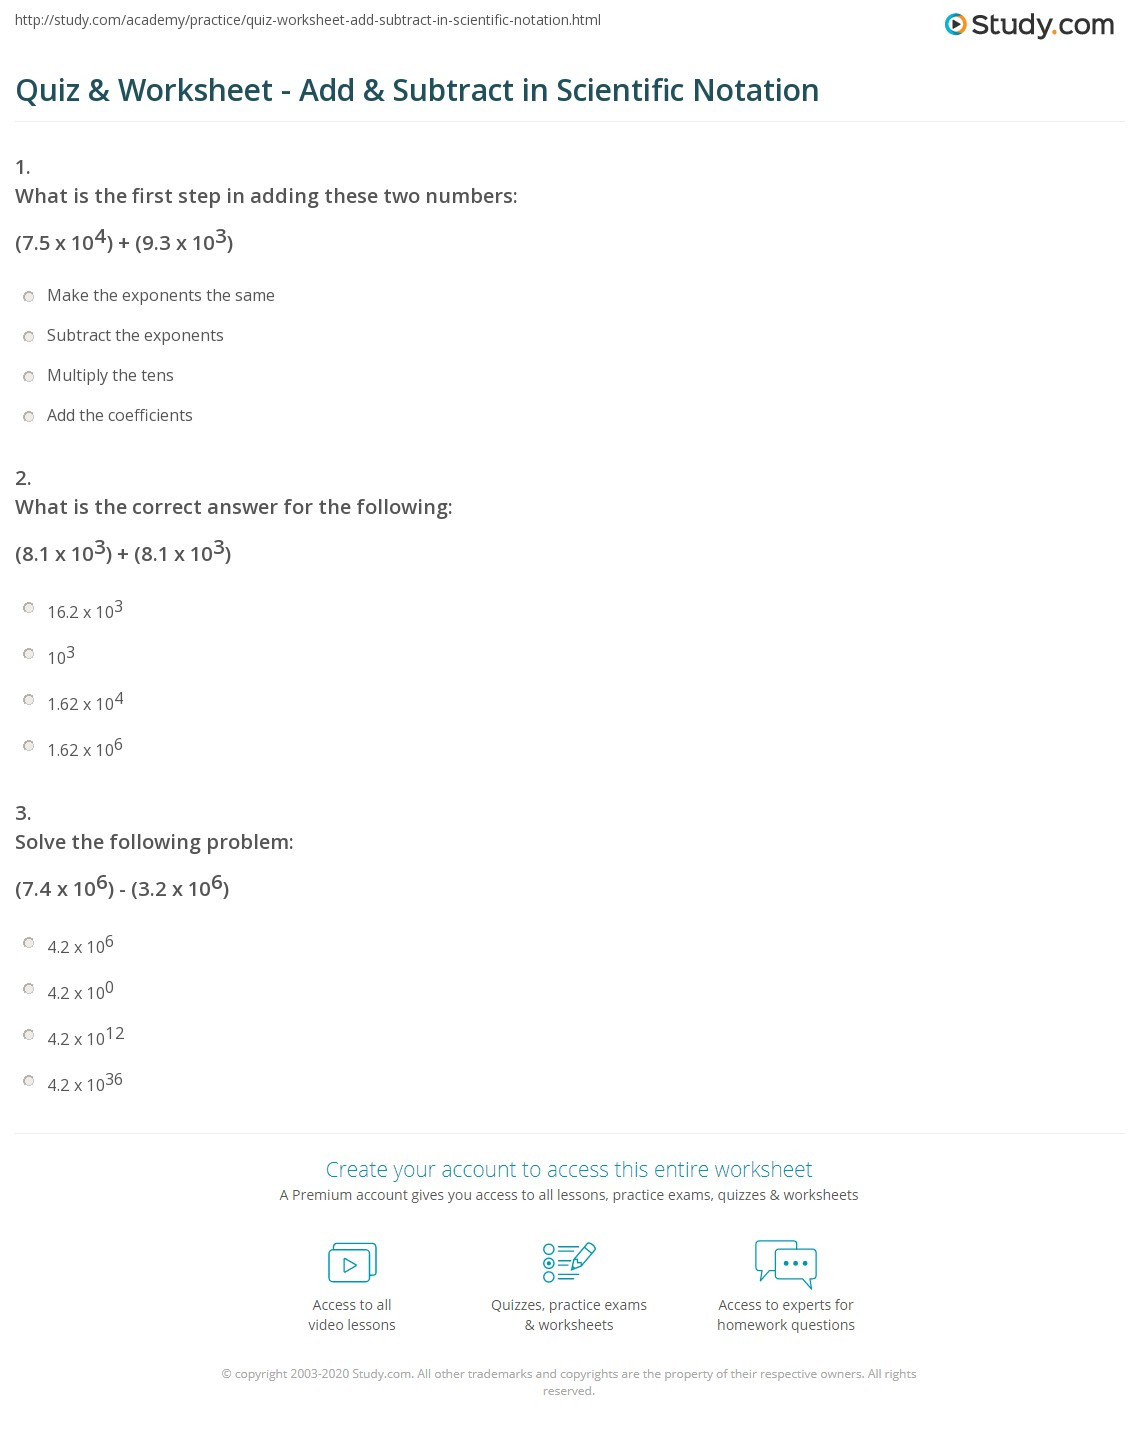 Adding Subtracting Scientific Notation Worksheet Quiz &amp; Worksheet Add &amp; Subtract In Scientific Notation